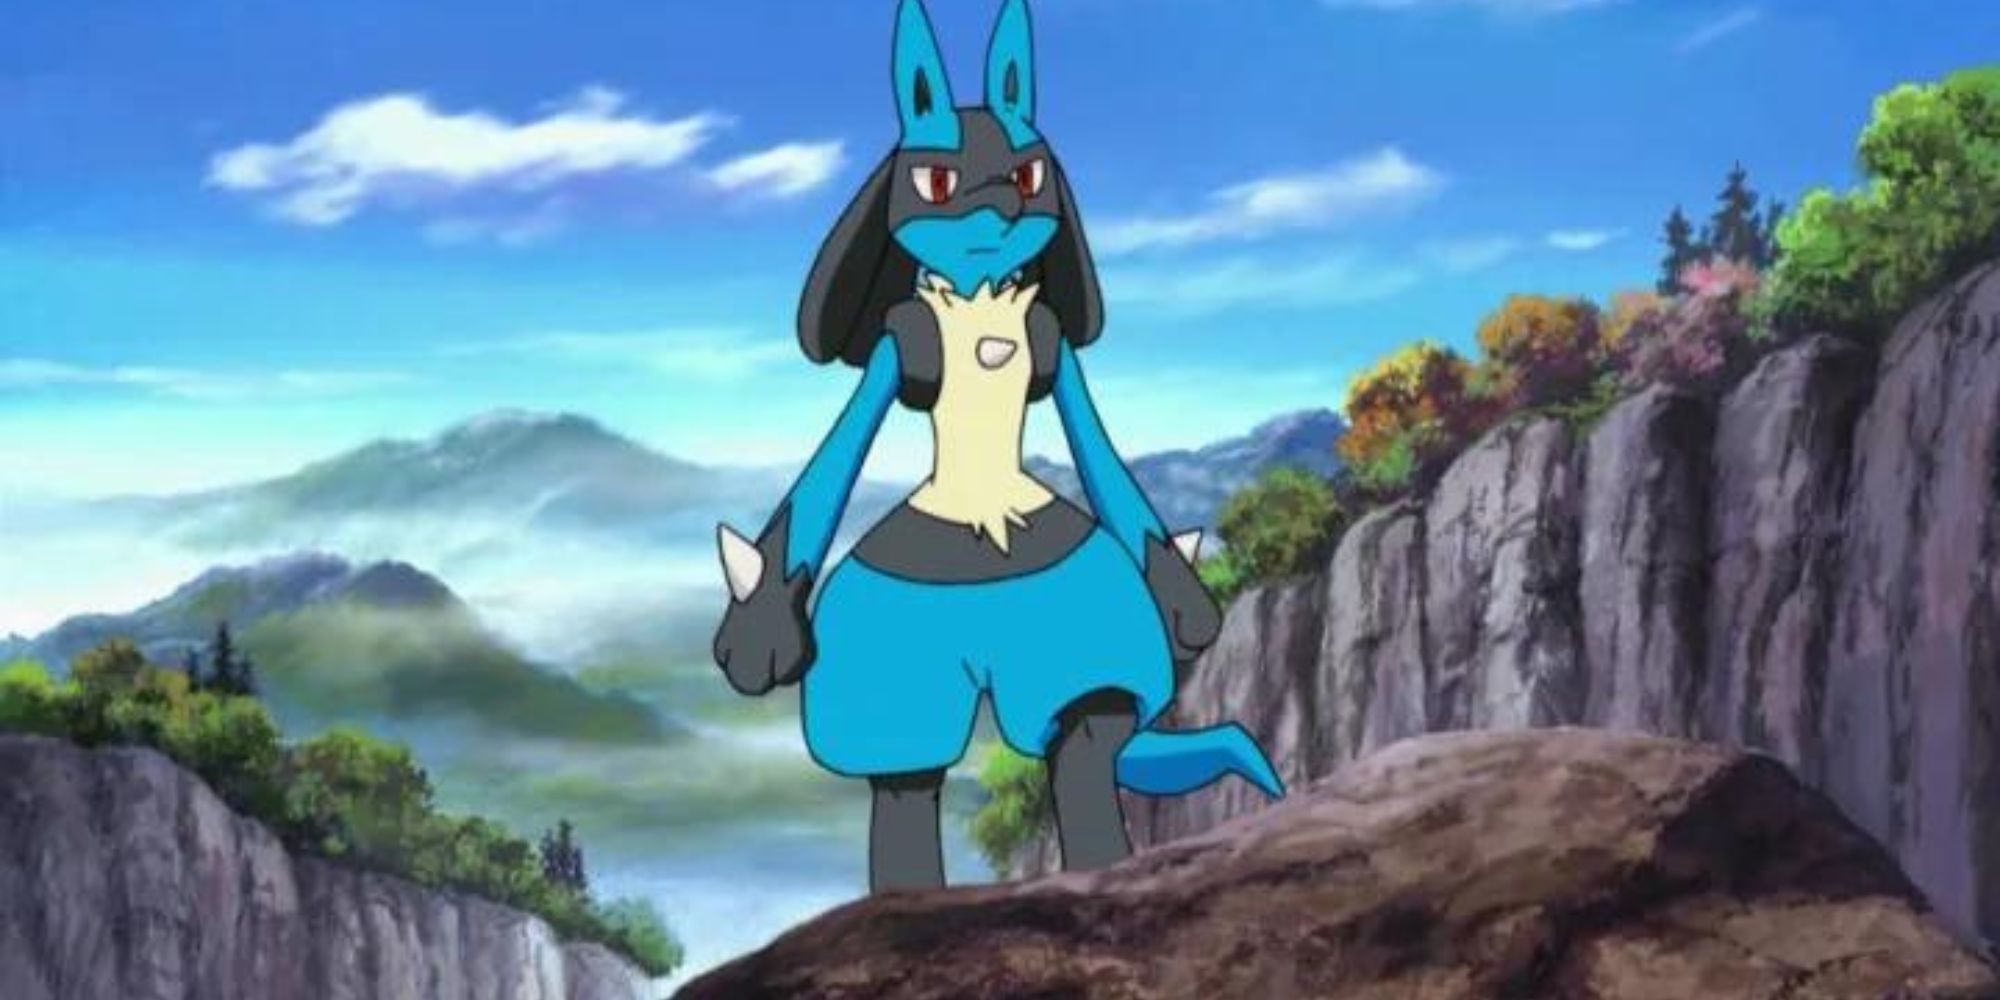 Lucario is standing on a rock near some mountains